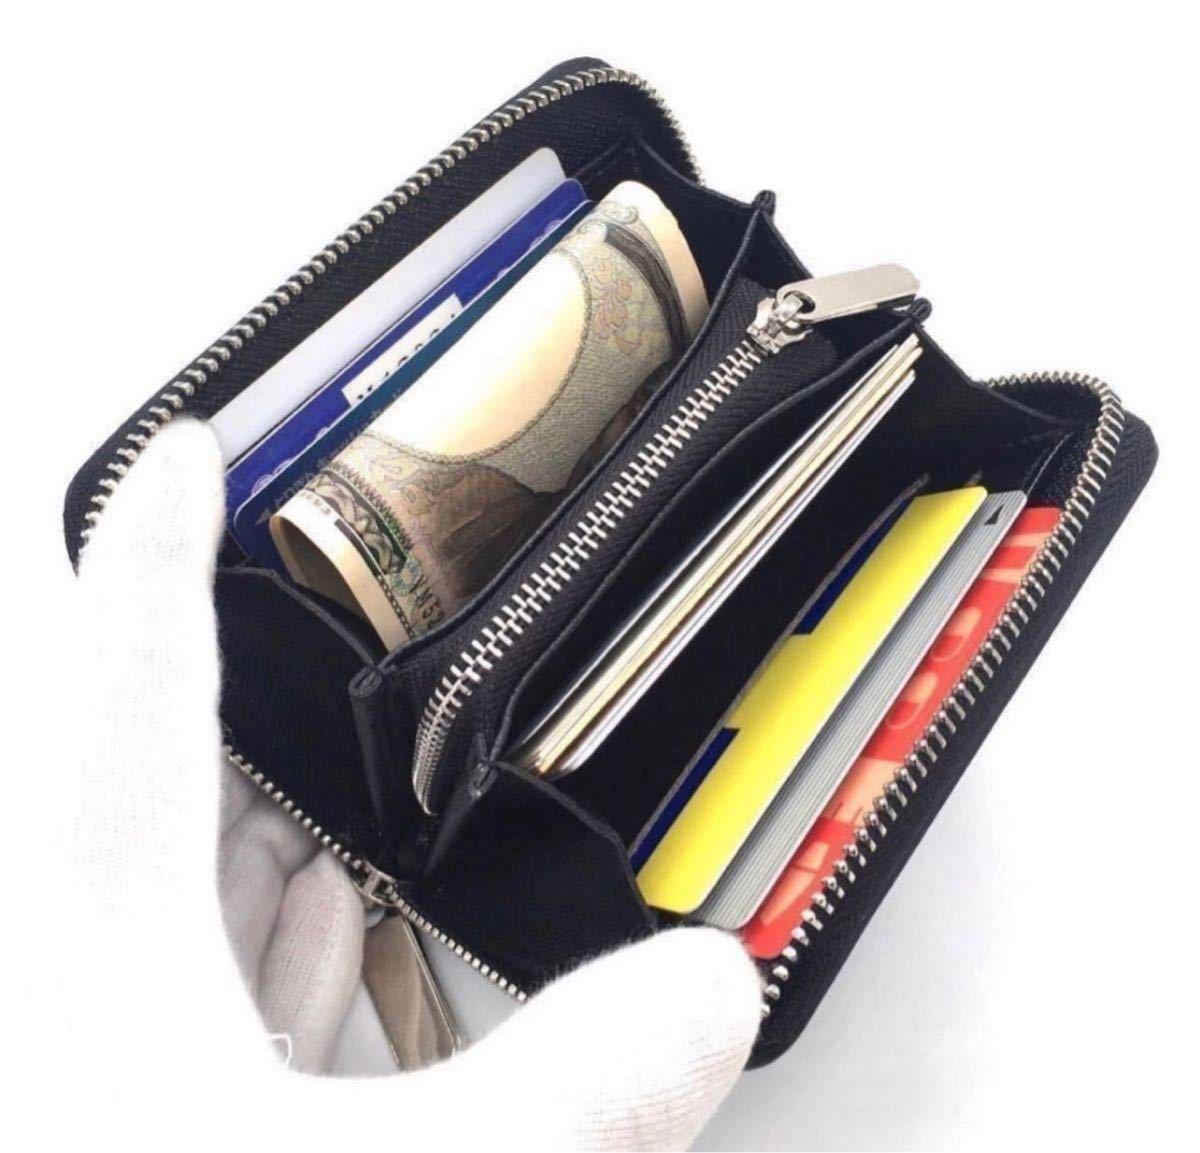  black new work goods leather / leather Mini purse round fastener change purse . standard type compact popular commodity 